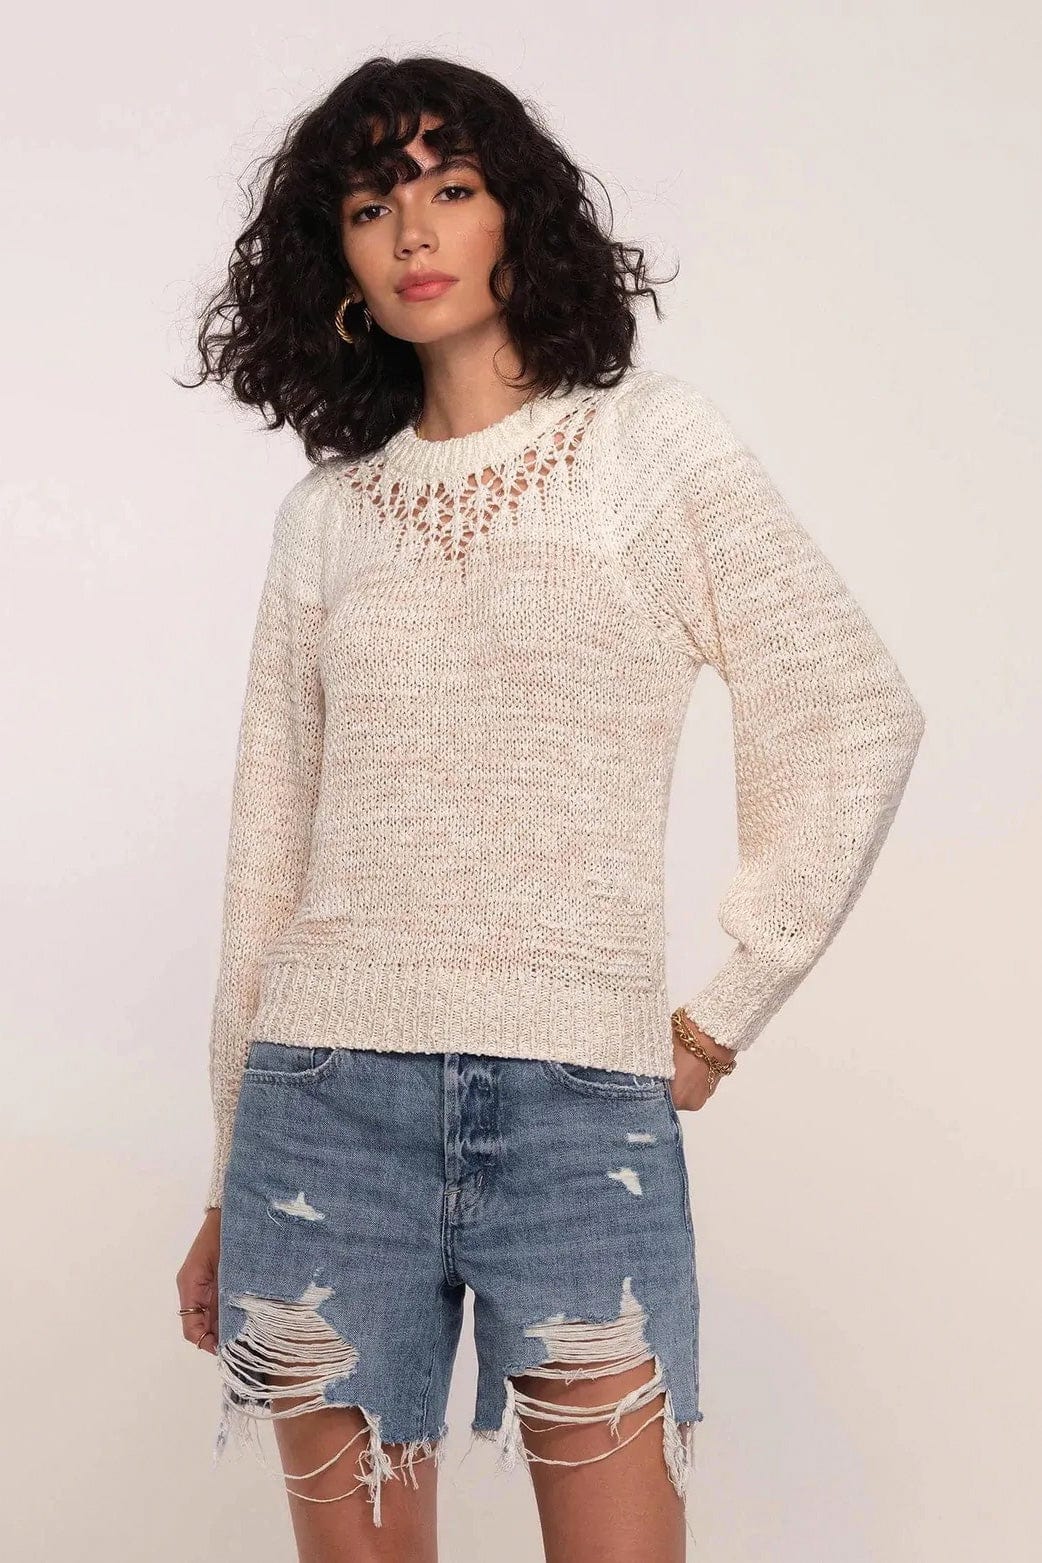 Bri Pointelle Knit Sweater in Ivory by Heartloom - Sweater - Blooming Daily